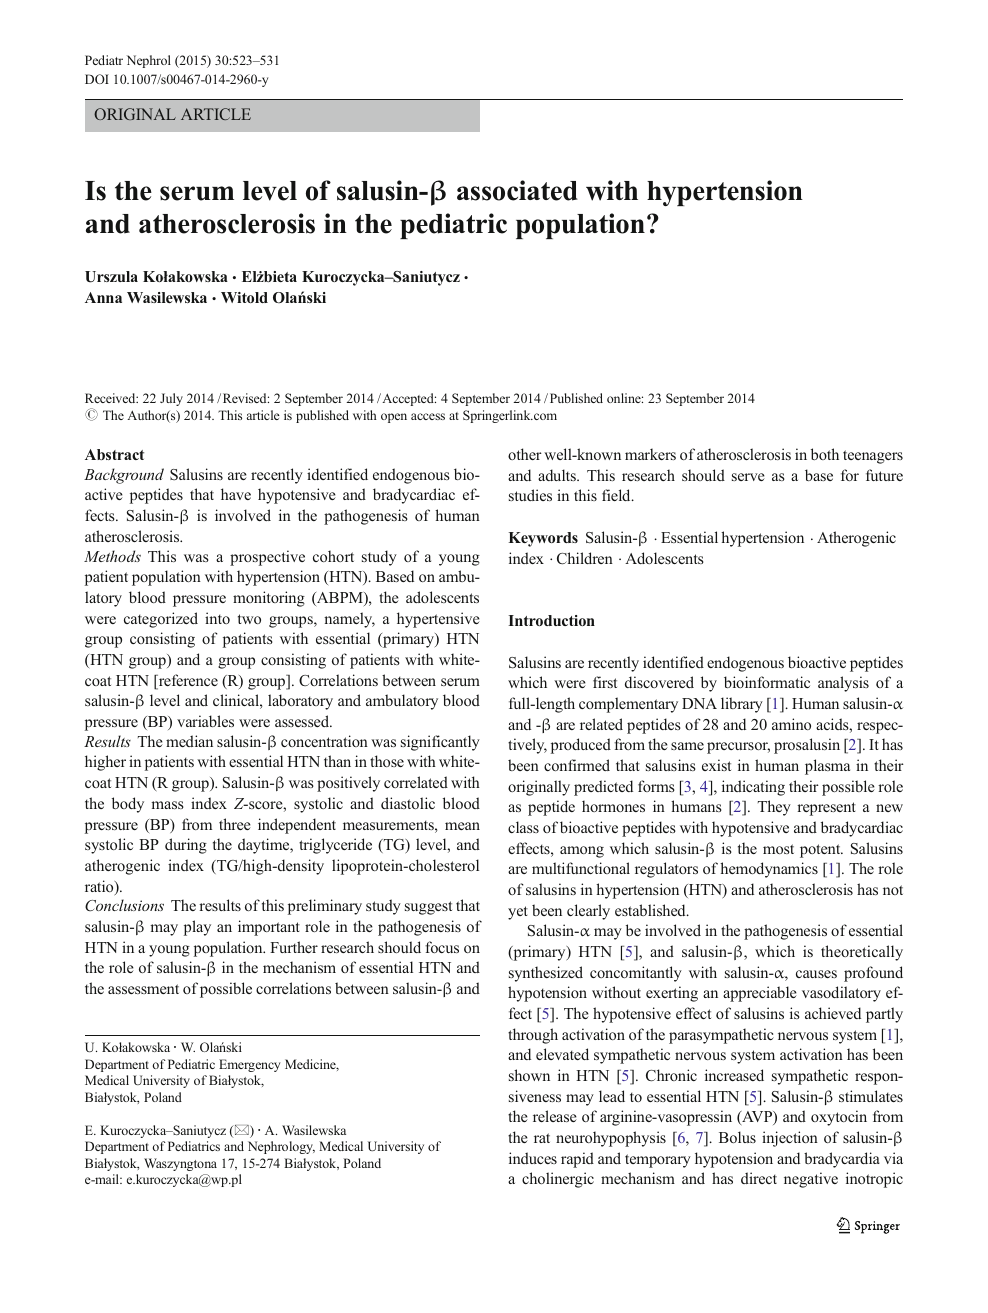 Is The Serum Level Of Salusin B Associated With Hypertension And Atherosclerosis In The Pediatric Population Topic Of Research Paper In Basic Medicine Download Scholarly Article Pdf And Read For Free On